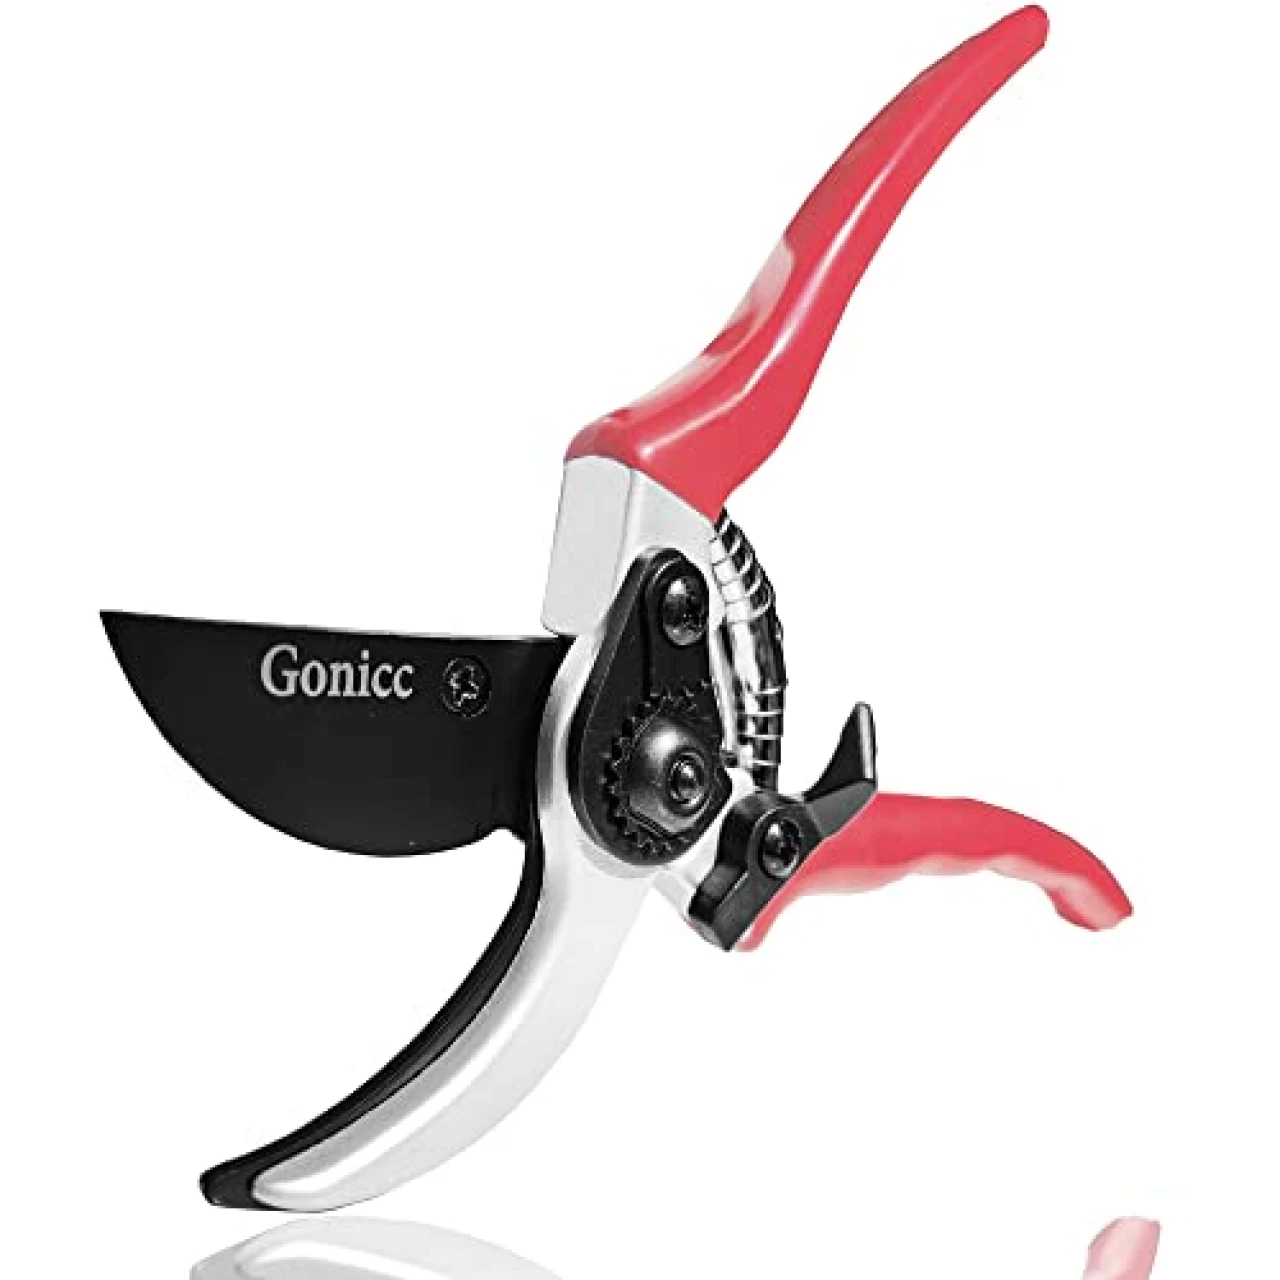 gonicc 8&quot; Professional Sharp Bypass Pruning Shears (GPPS-1002), Tree Trimmers Secateurs,Hand Pruner, Garden Shears,Clippers For The Garden, Bonsai Cutters, Loppers